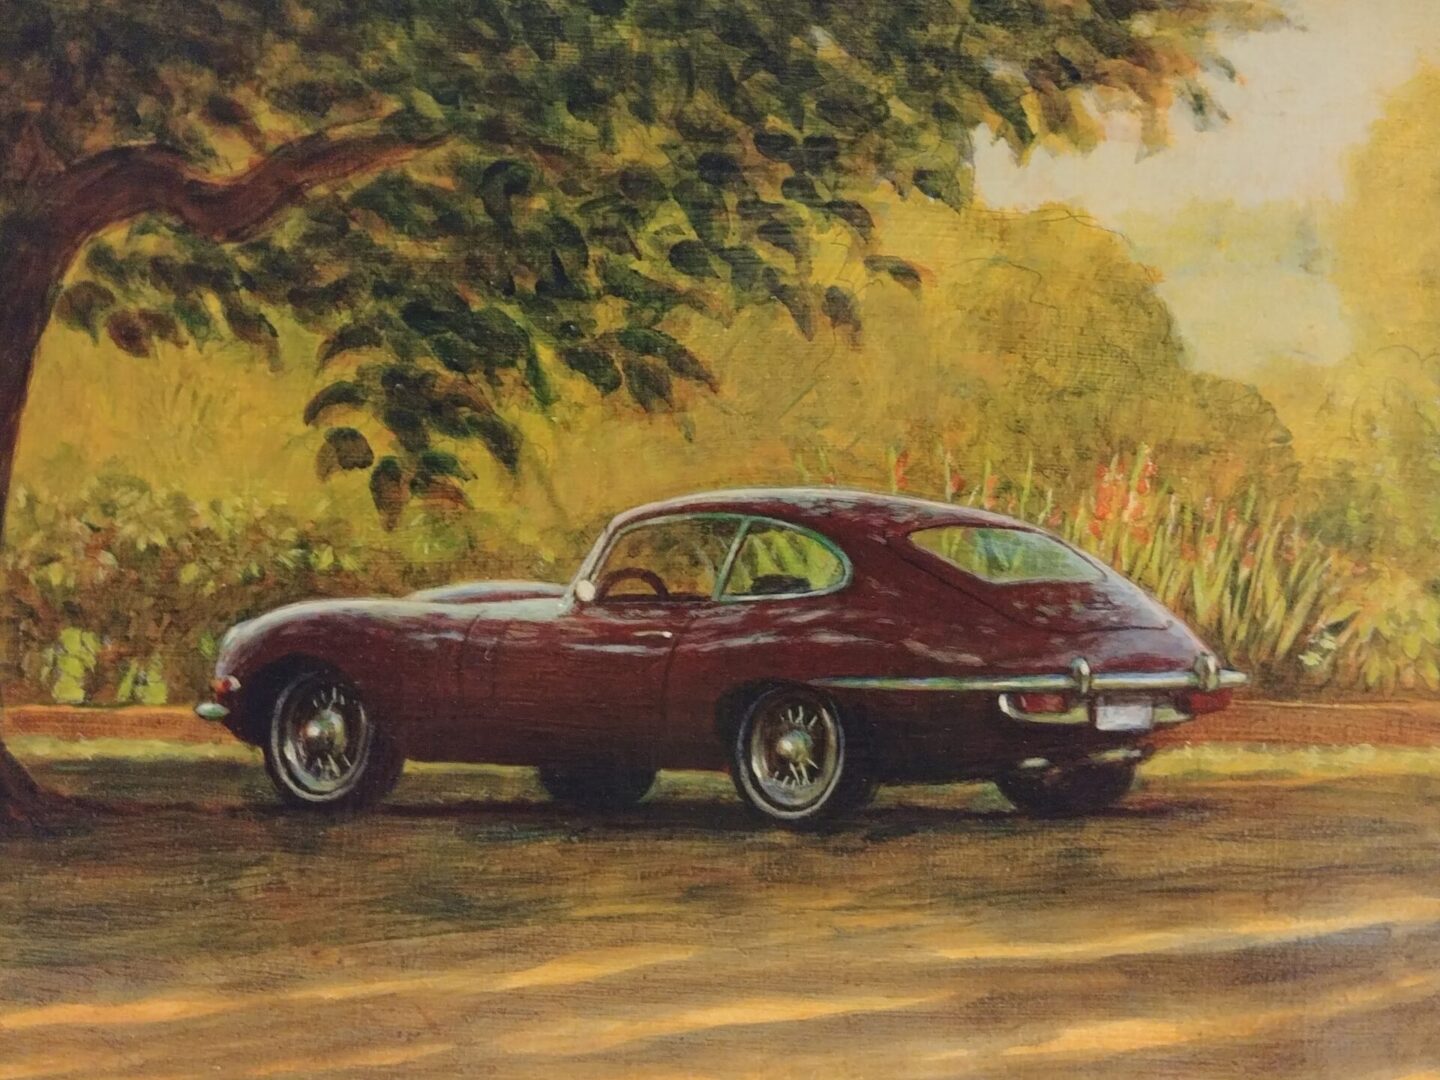 A painting of an old car parked on the side of a road.